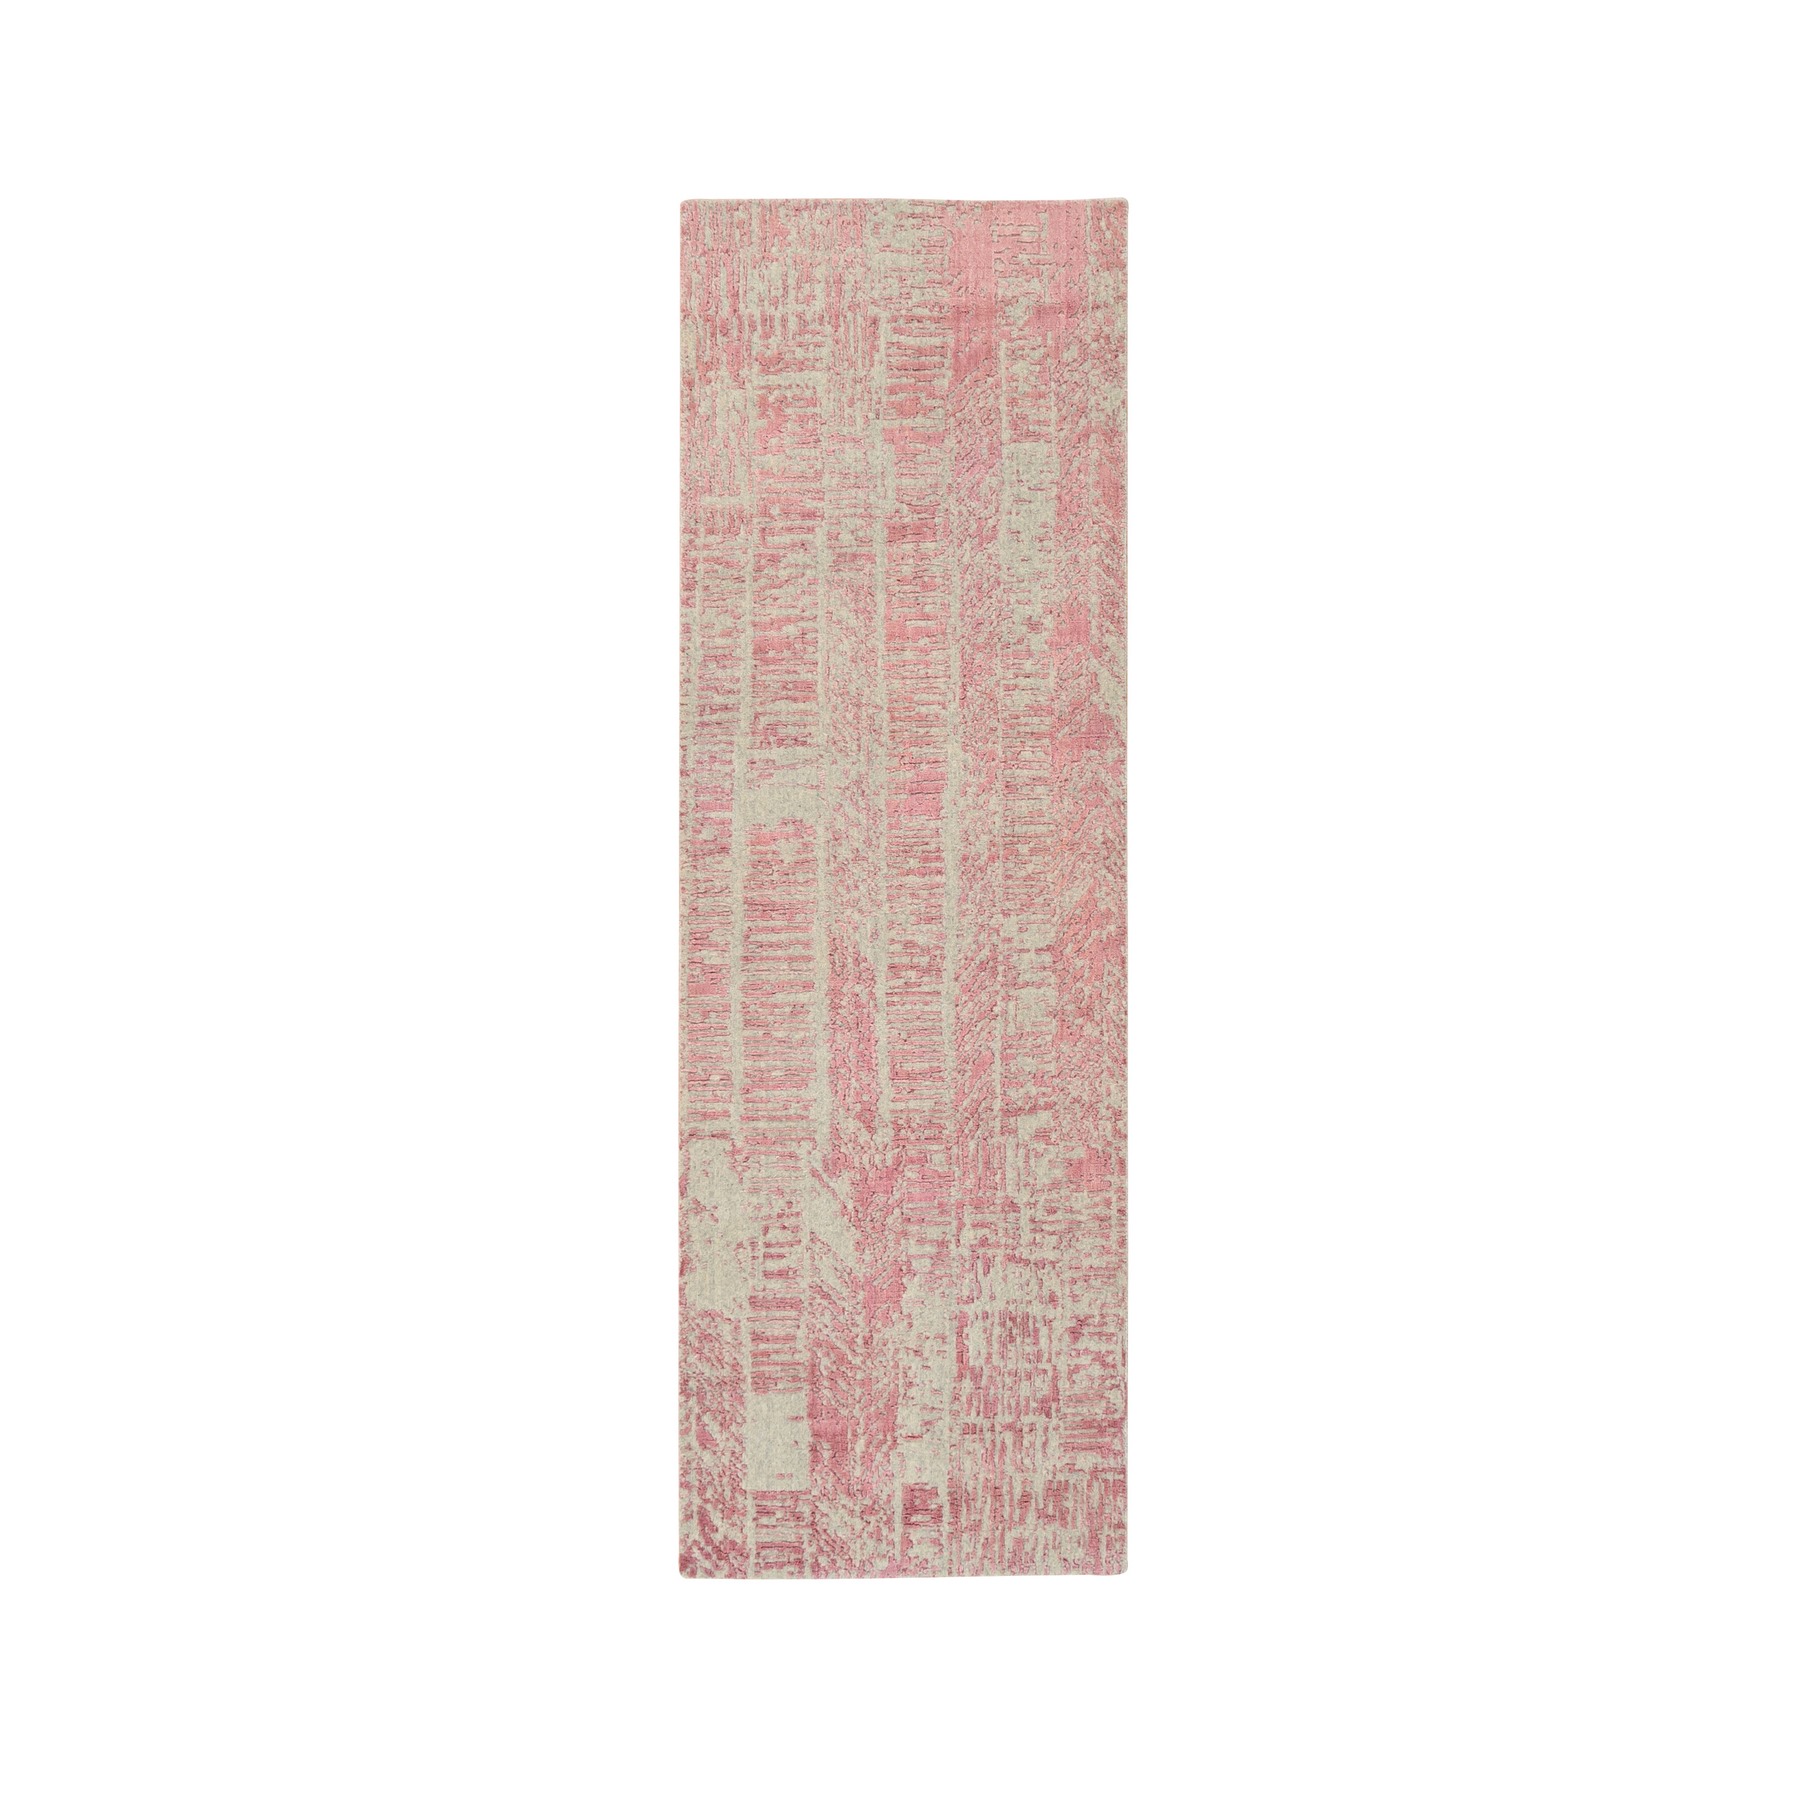 2'6"x8' Rose Pink, All Over Design Wool and Art Silk, Jacquard Hand Loomed, Runner Oriental Rug 